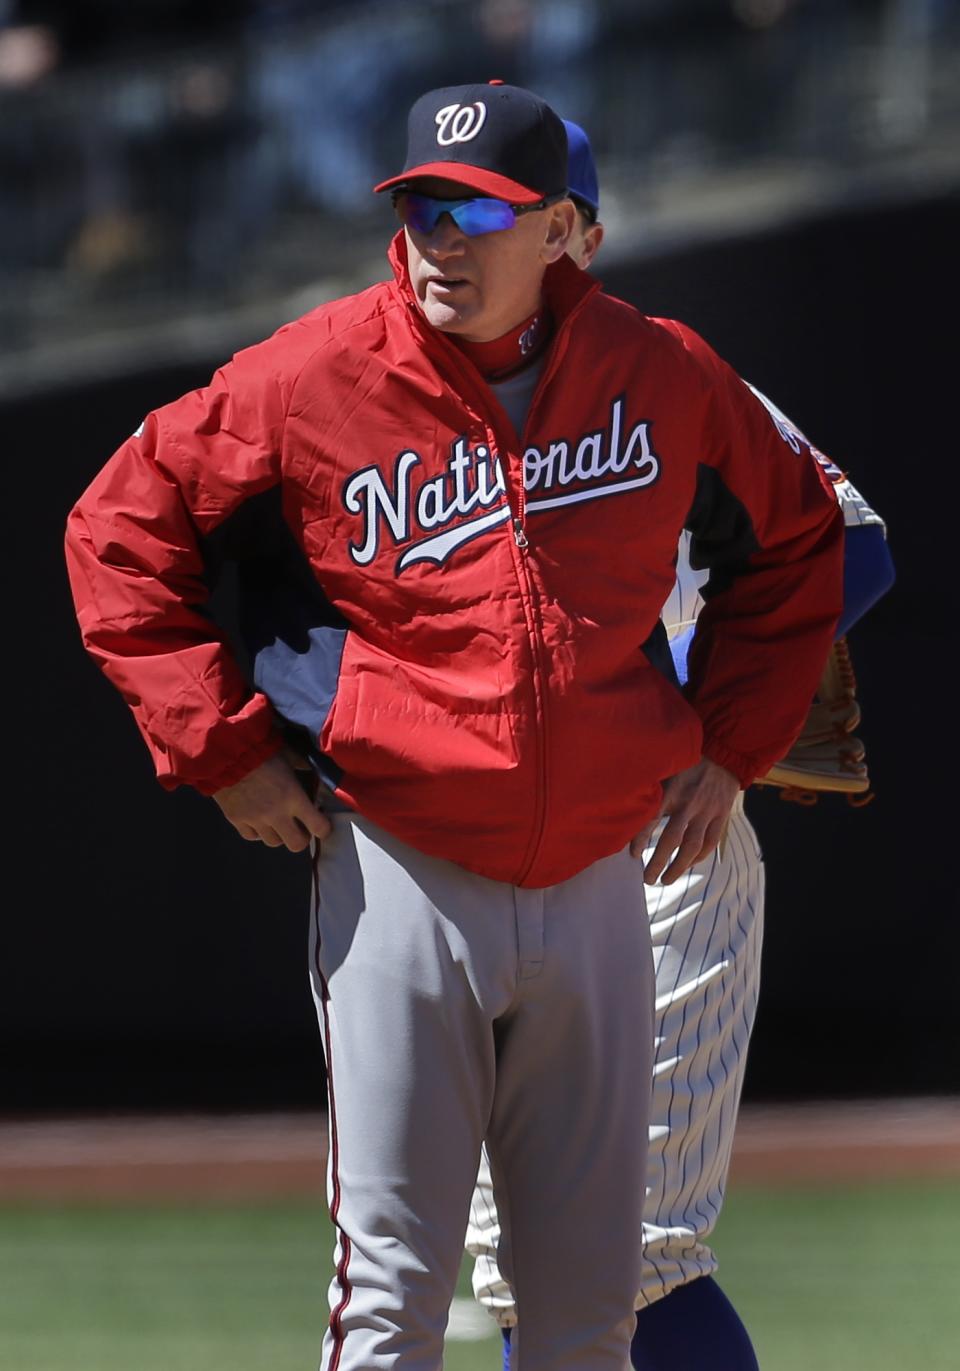 Washington Nationals manager Matt Williams stands on the field during the second inning of the baseball game against the New York Mets on Opening Day at Citi Field in New York, Monday, March 31, 2014. (AP Photo/Seth Wenig)